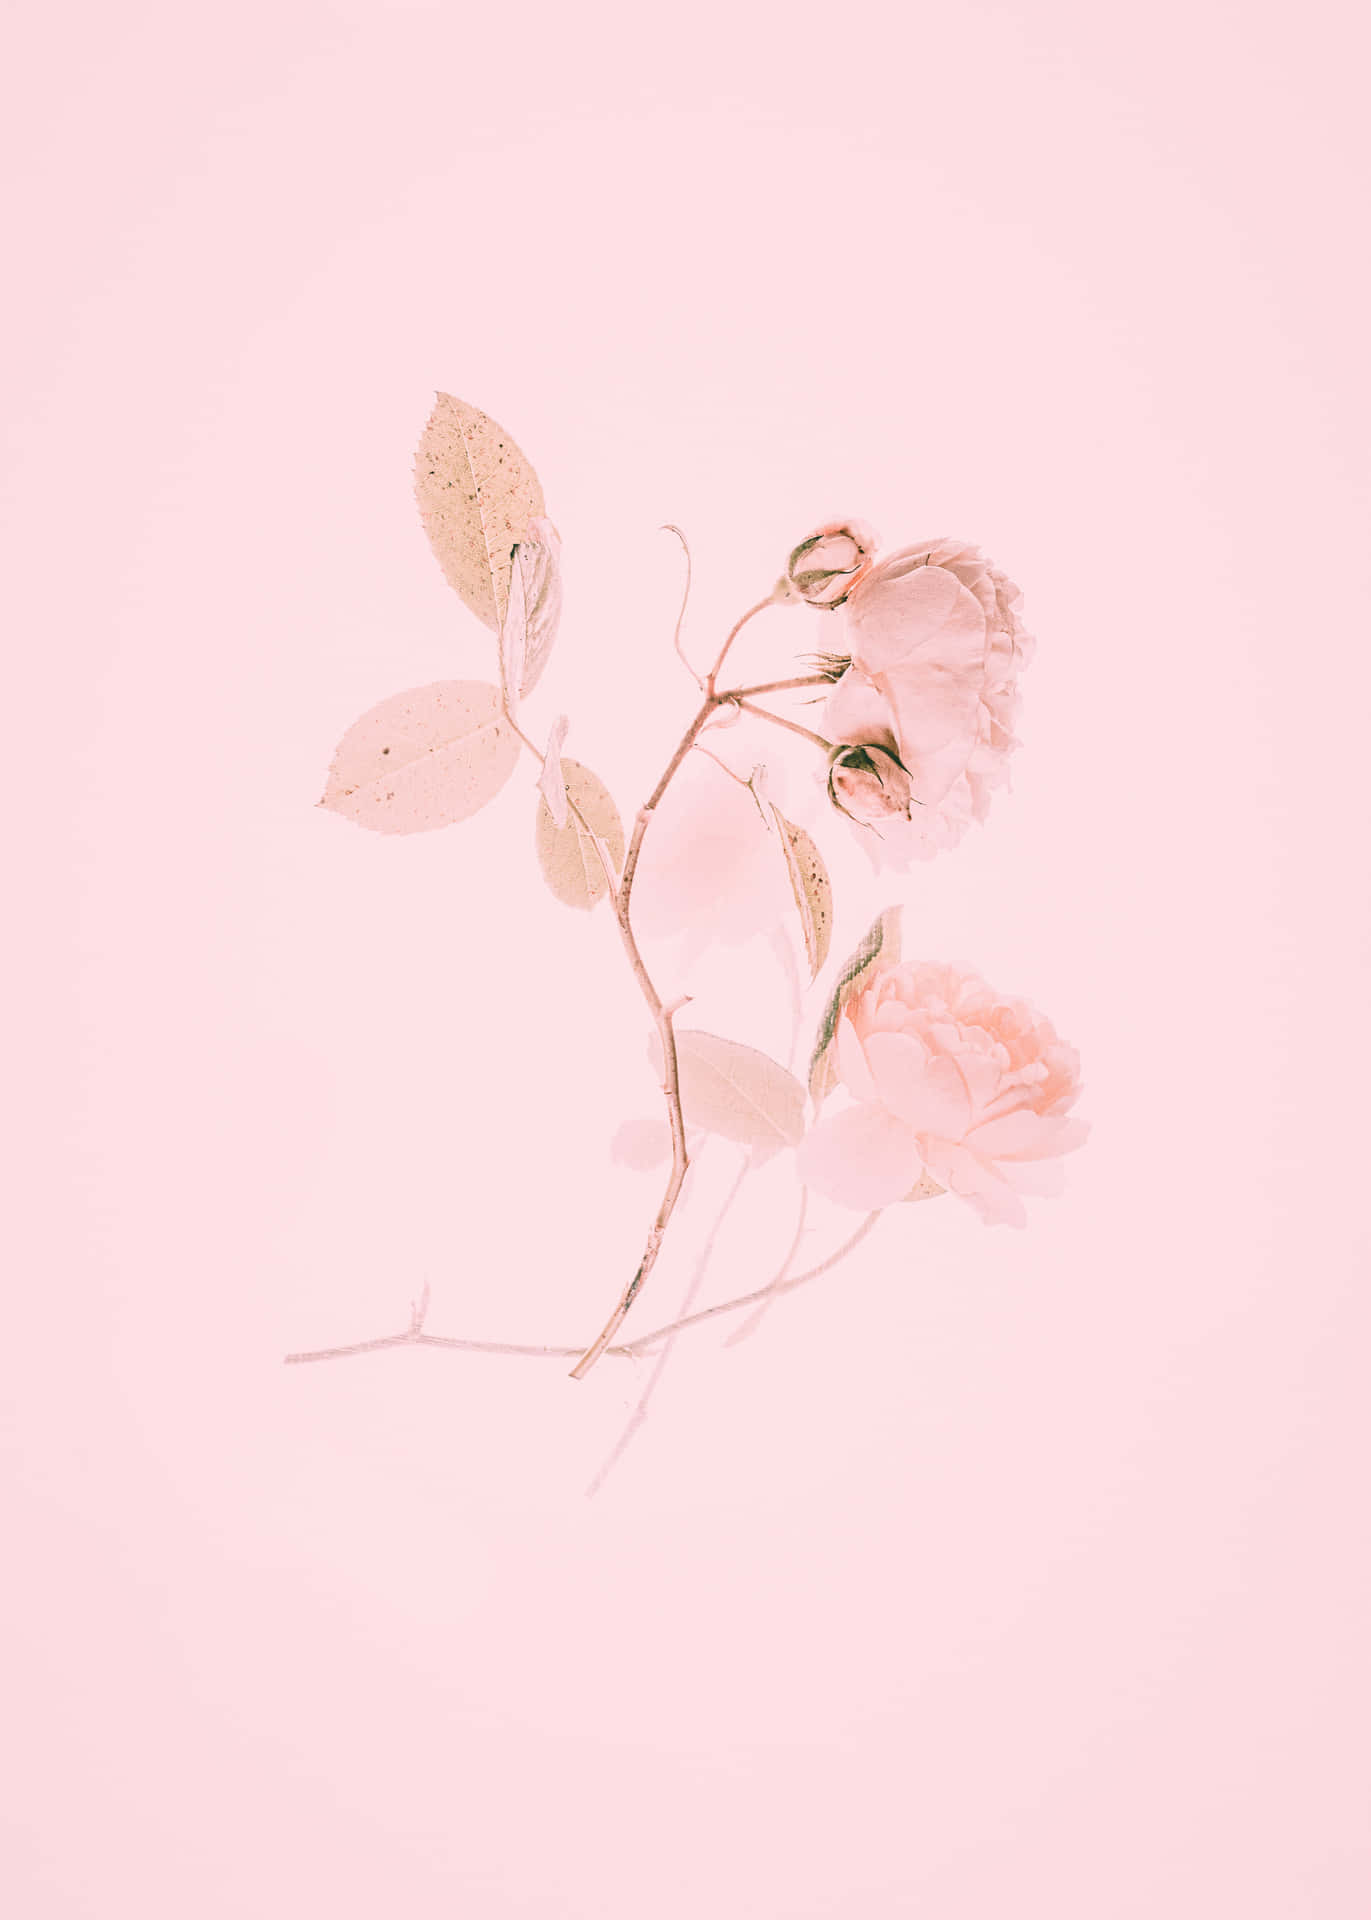 A calming blush pink background which is sure to bring a sense of peace